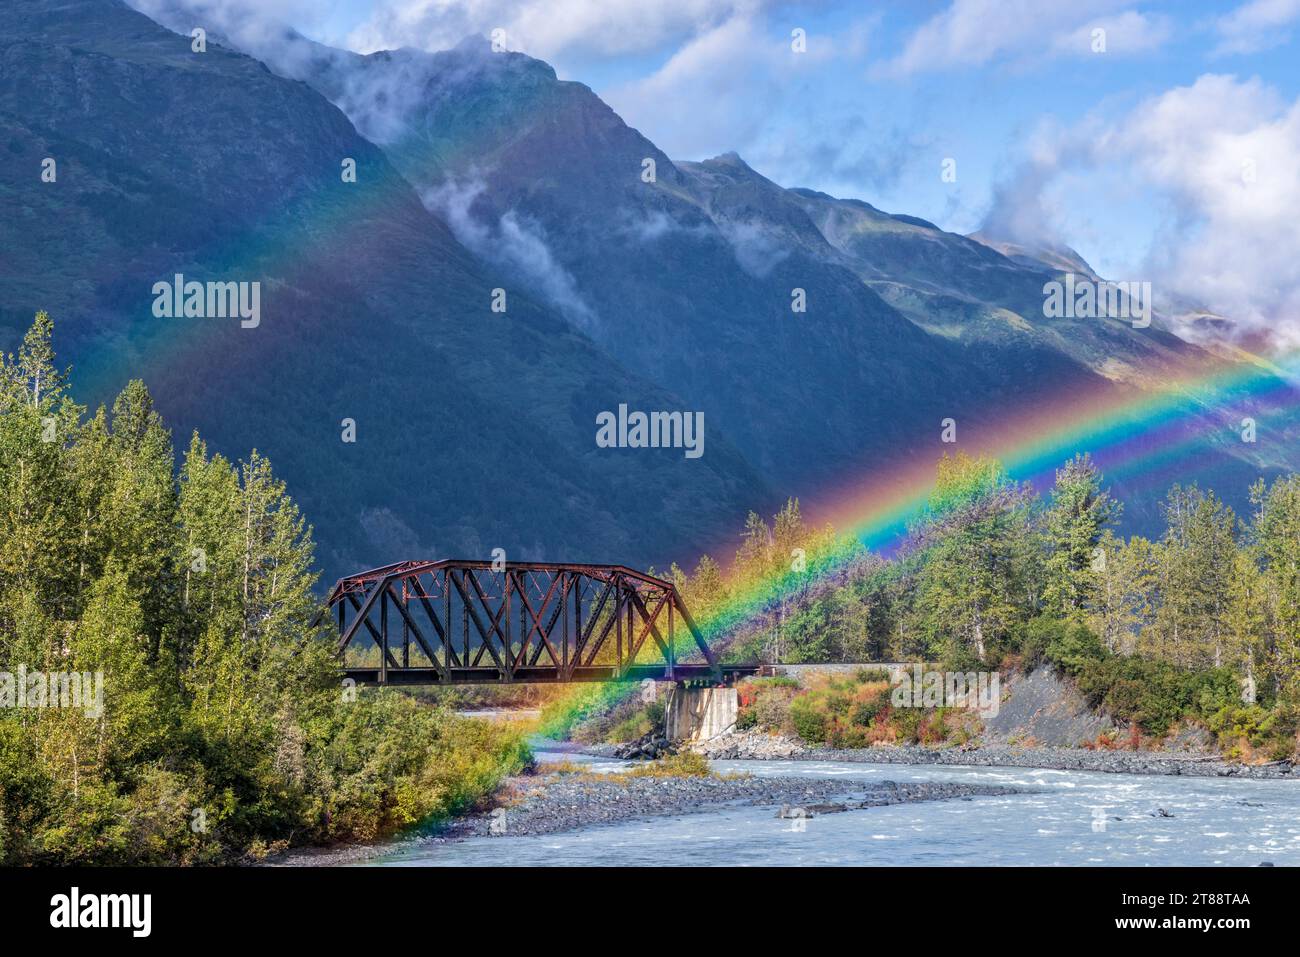 The end (or beginning) of a double rainbow on an Alaska Railroad bridge over the Placer River near Spencer Glacier in Chugach National Forest, Alaska. Stock Photo